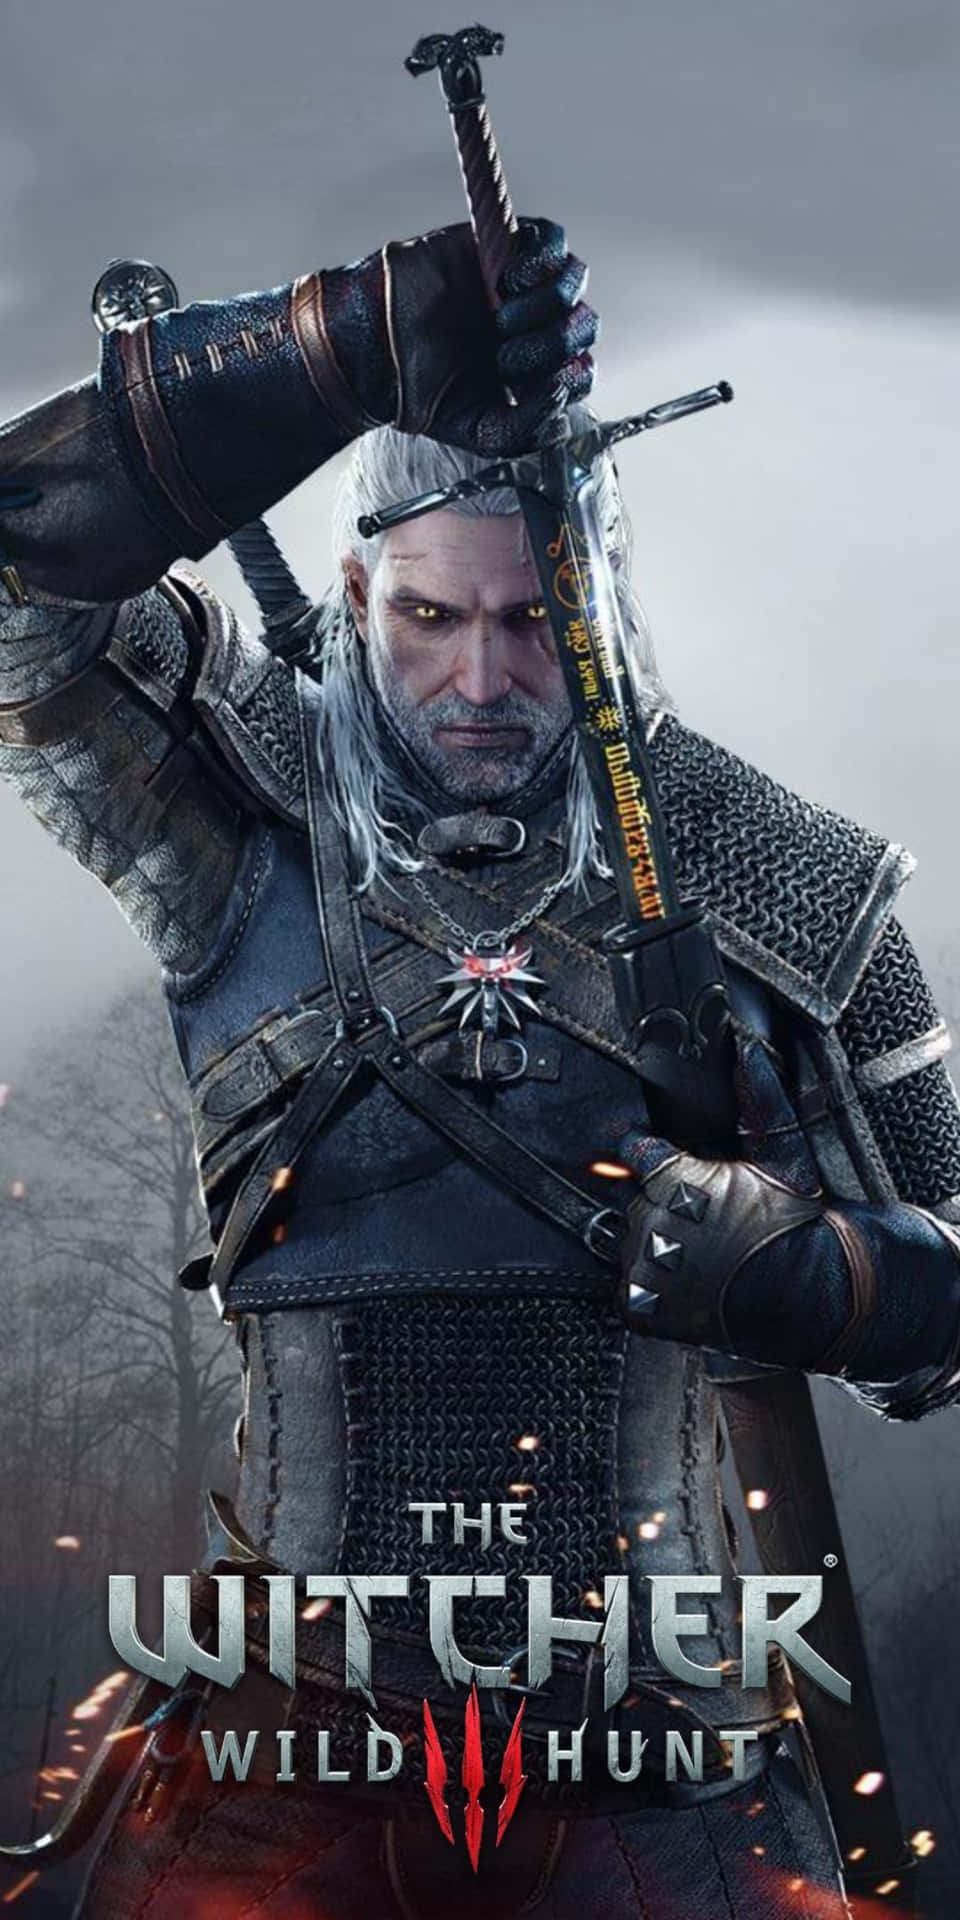 The Witcher Wild Hunt Pc